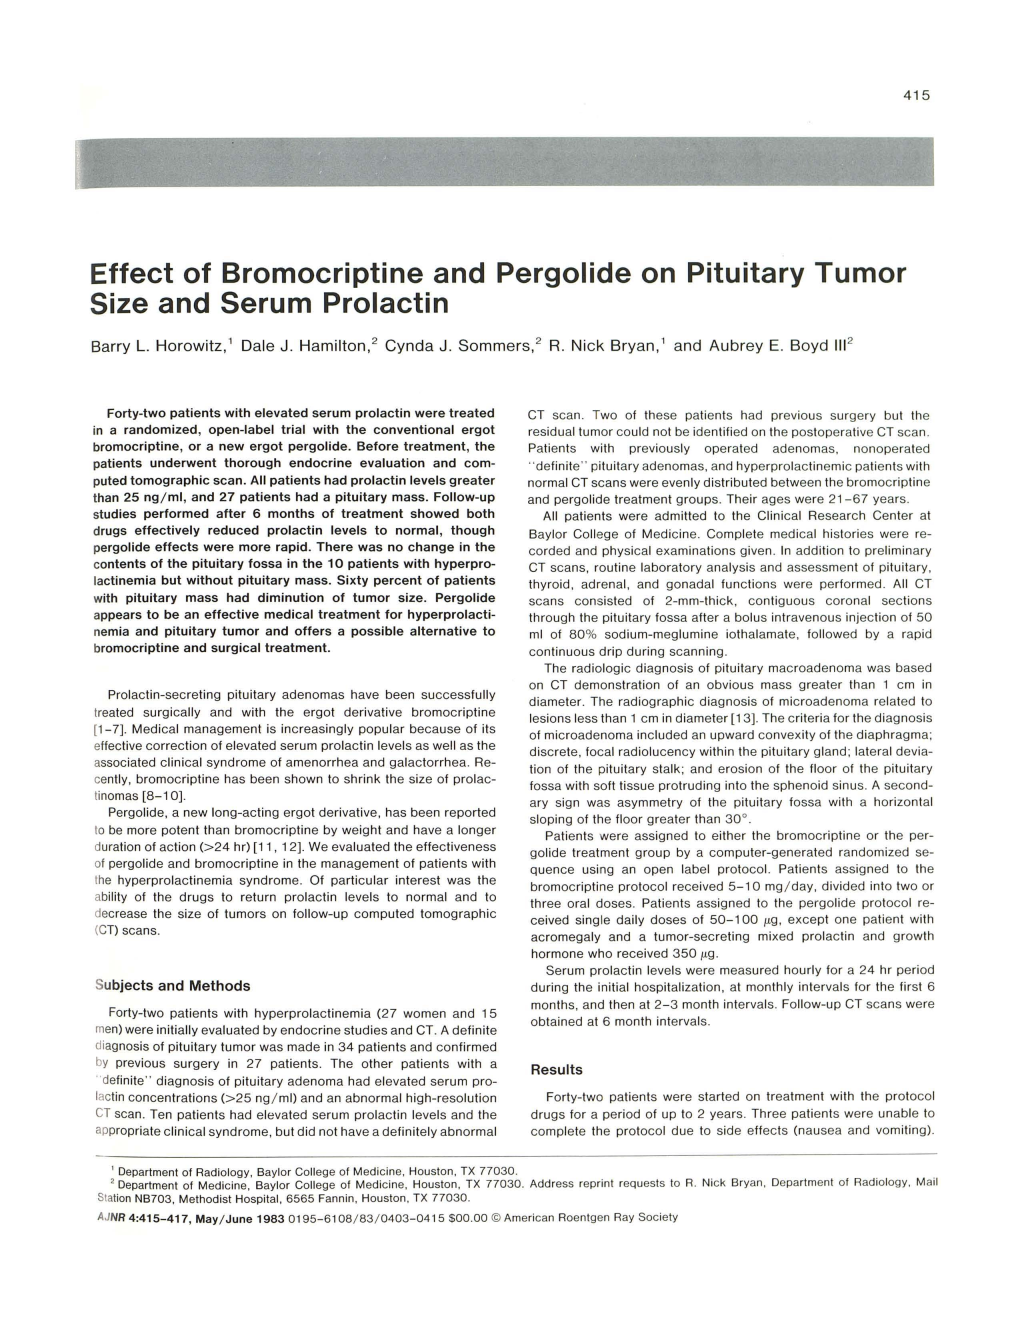 Effect of Bromocriptine and Pergolide on Pituitary Tumor Size and Serum Prolactin